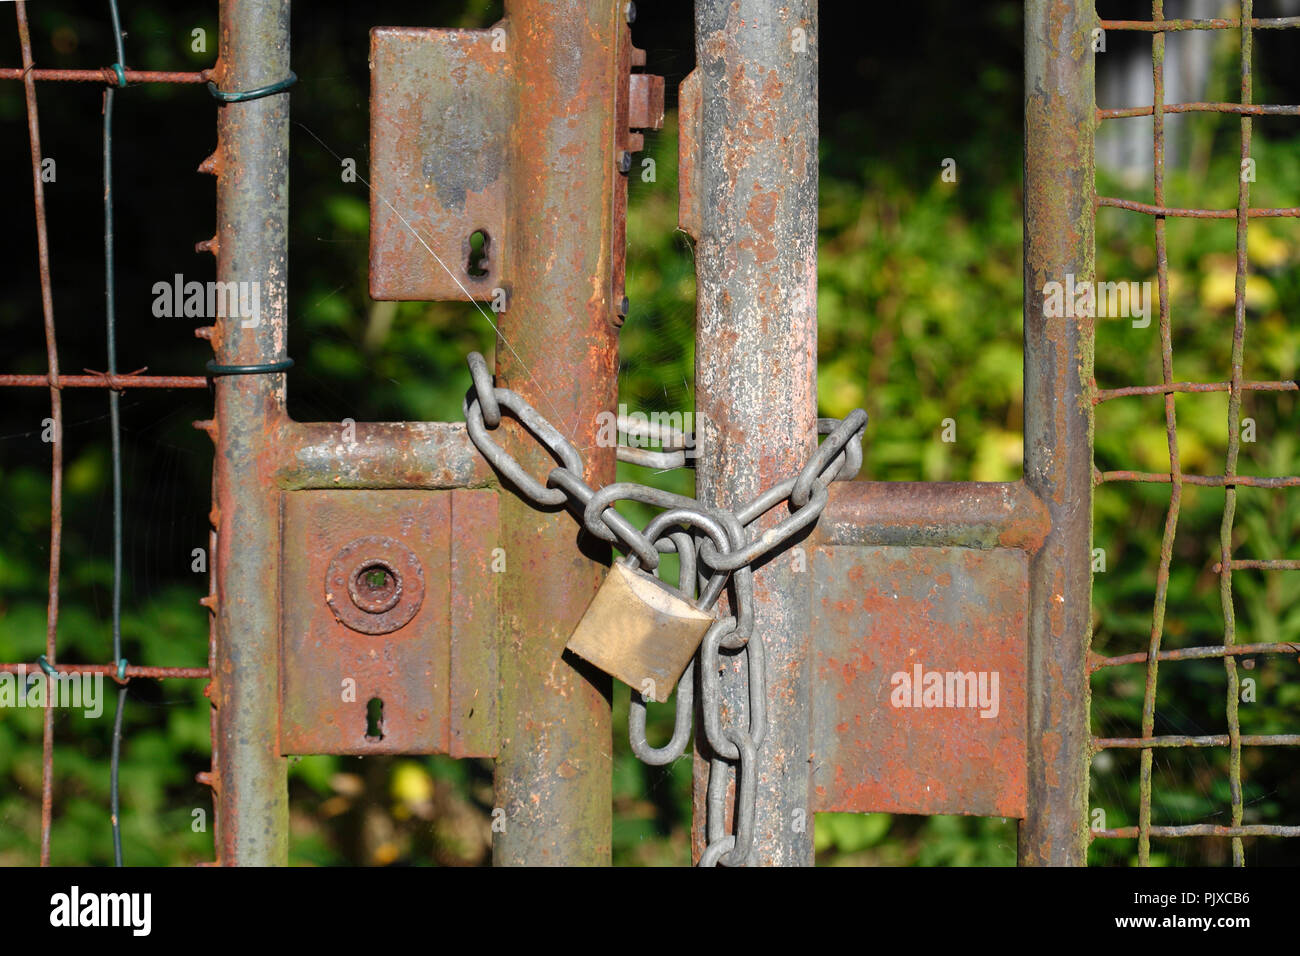 Old rusty gate and castles of metal, Germany, Europe Stock Photo